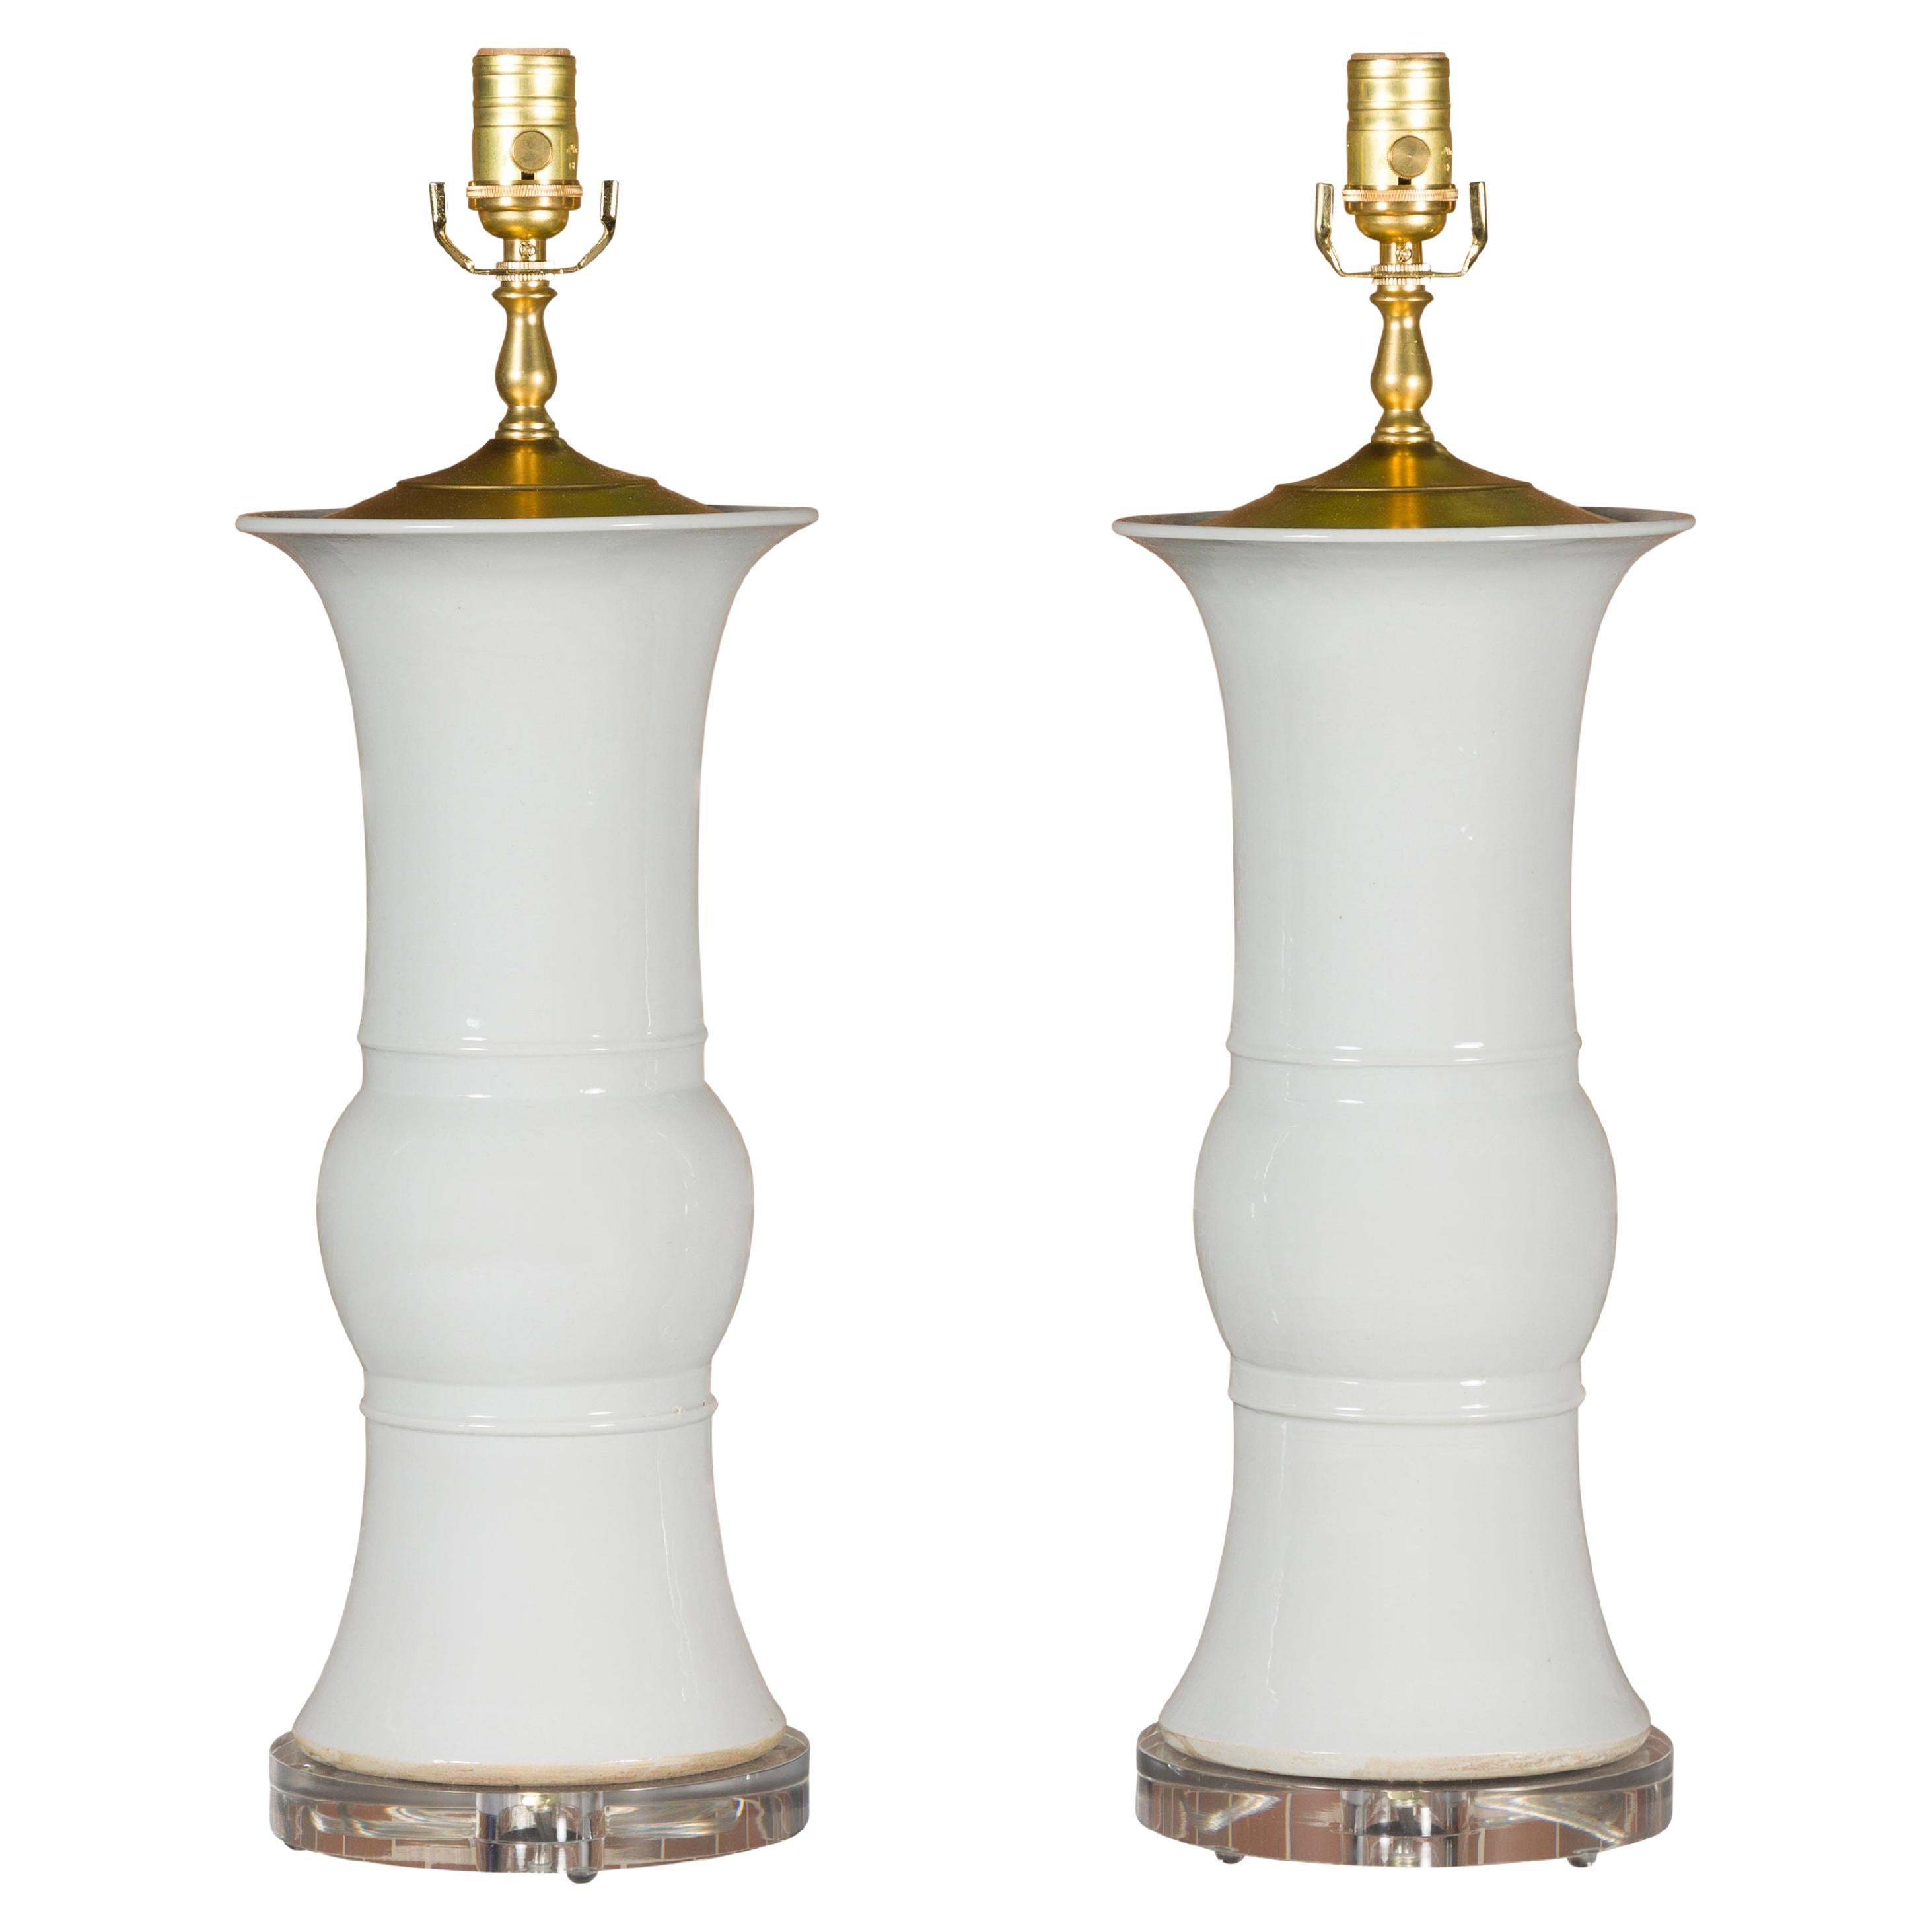 Pair of White Porcelain Table Lamps on Custom Lucite Bases, Wired for the USA